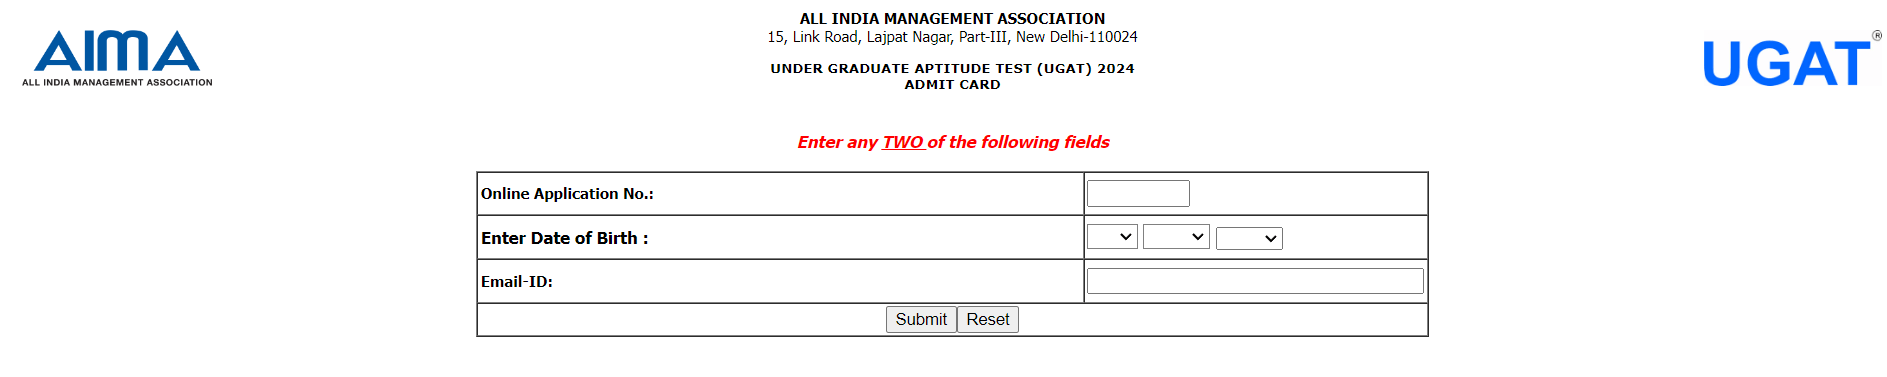 AIMA UGAT Admit Card 2024 Released, Download Link at www.aima.in_3.1